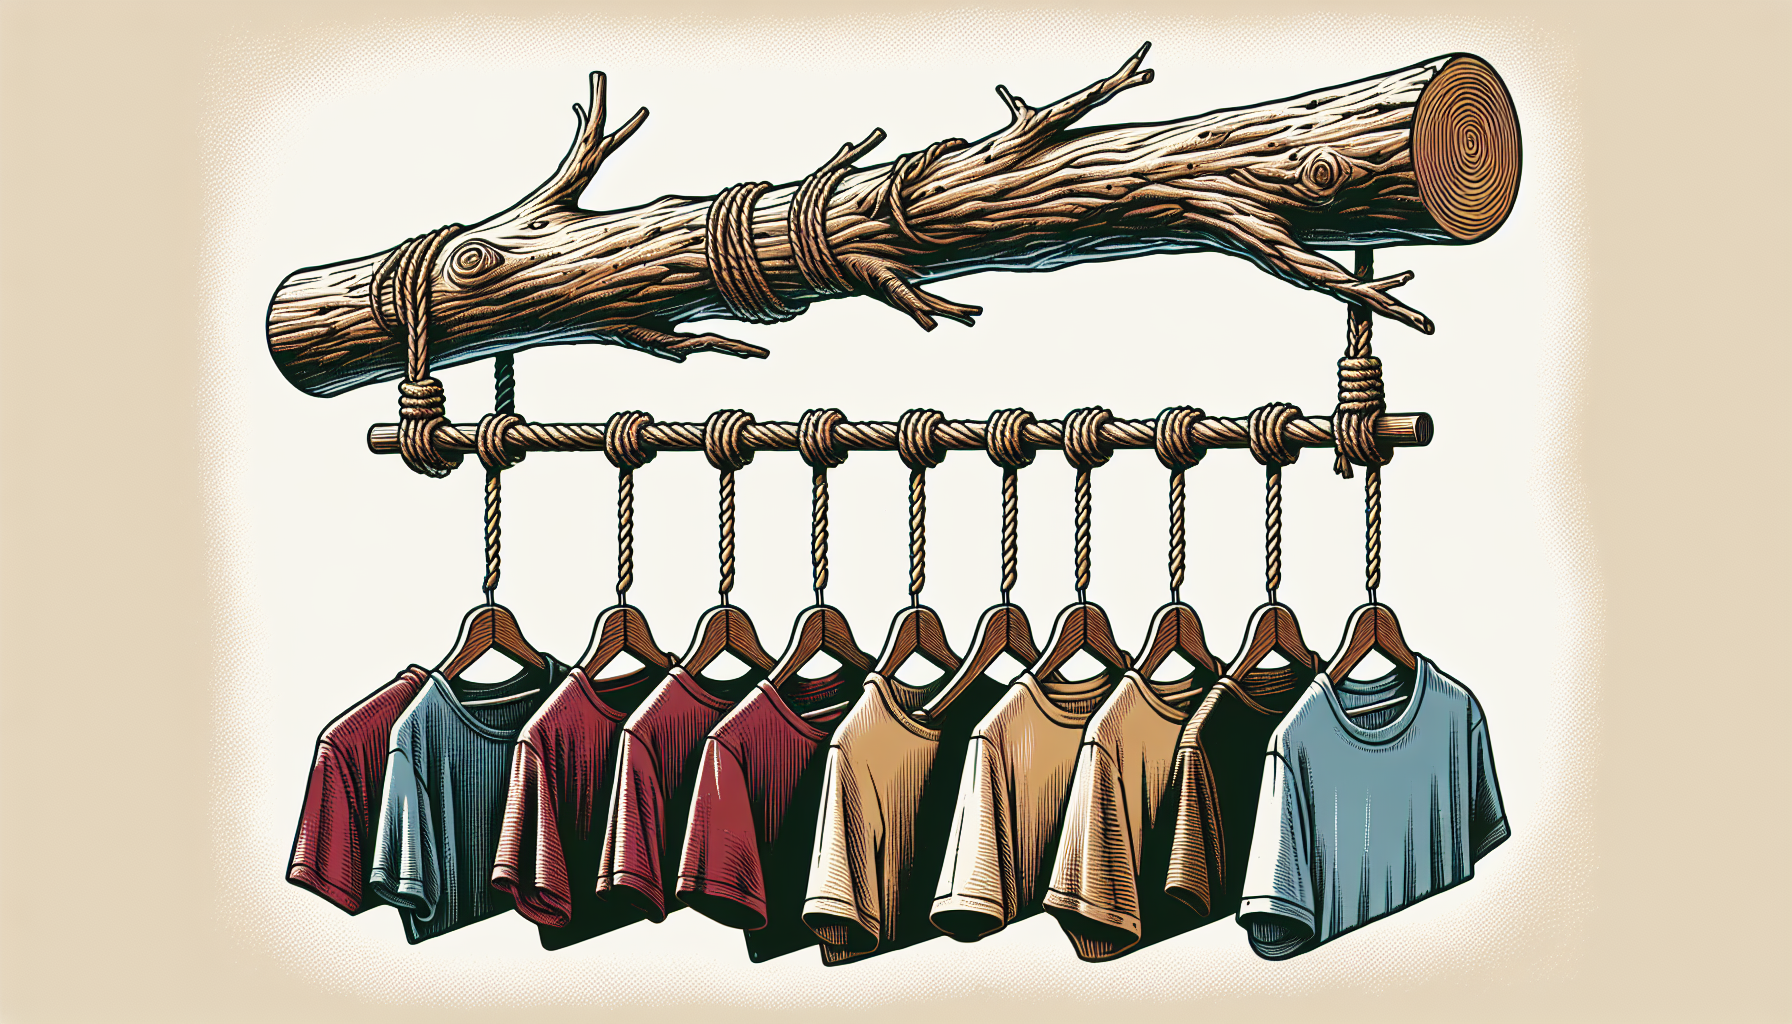 Illustration of a custom DIY clothing rack made from a branch or dowel rod with hanging t-shirts